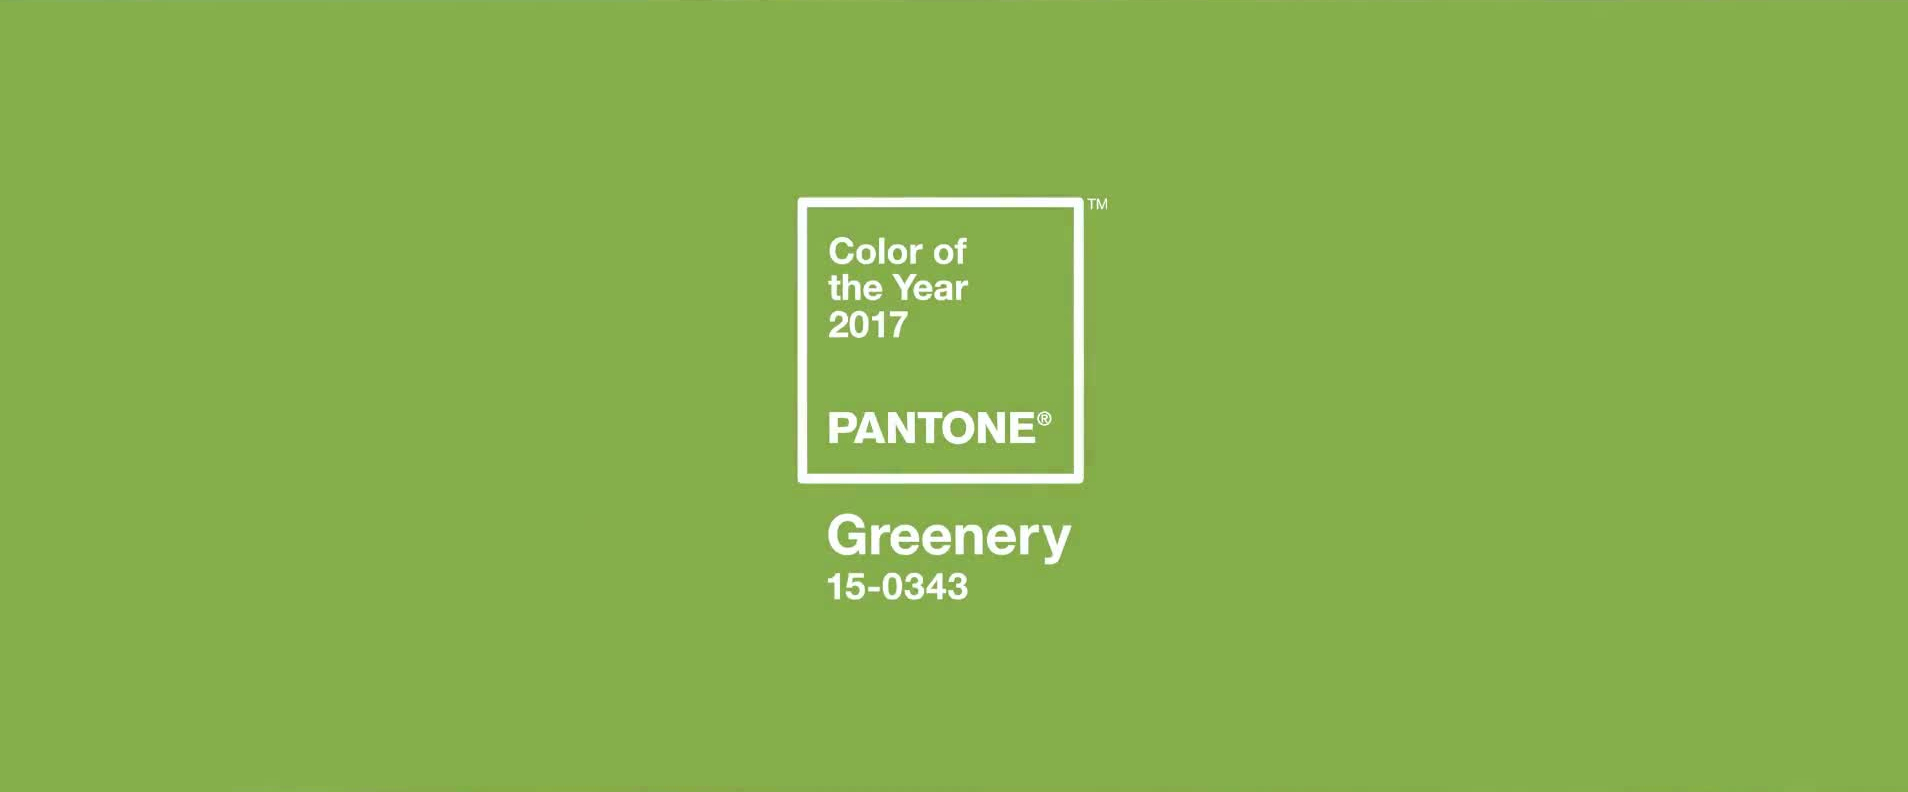 Pantone Color of the Year 2017 - Greenery